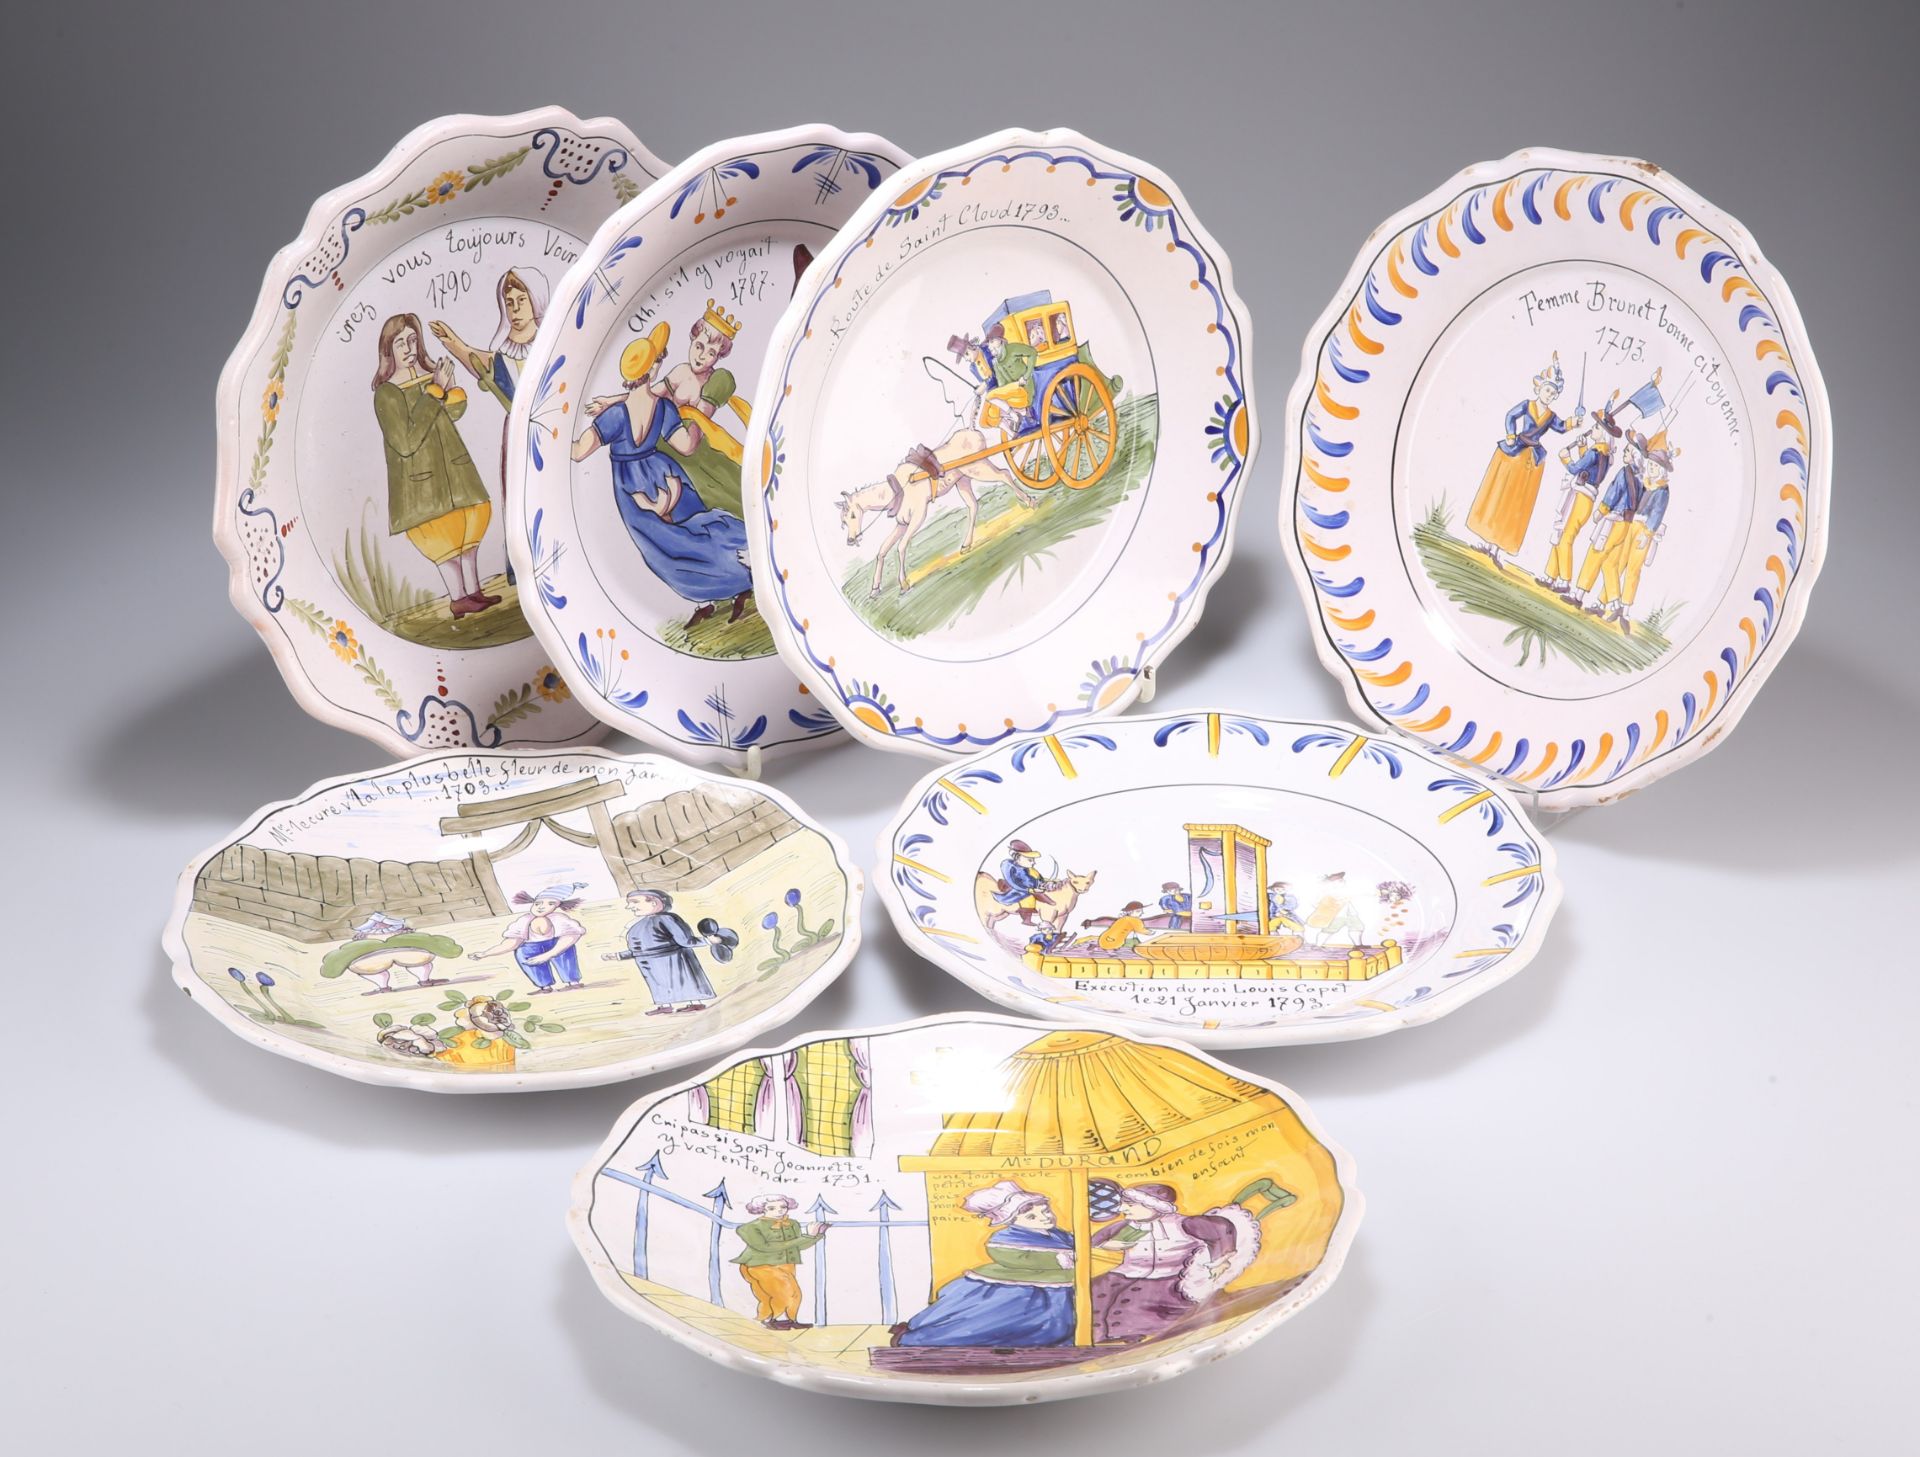 A GROUP OF SEVEN 'FRENCH REVOLUTION' COMMEMORATIVE FAIENCE PLATES, each of shaped circular form.